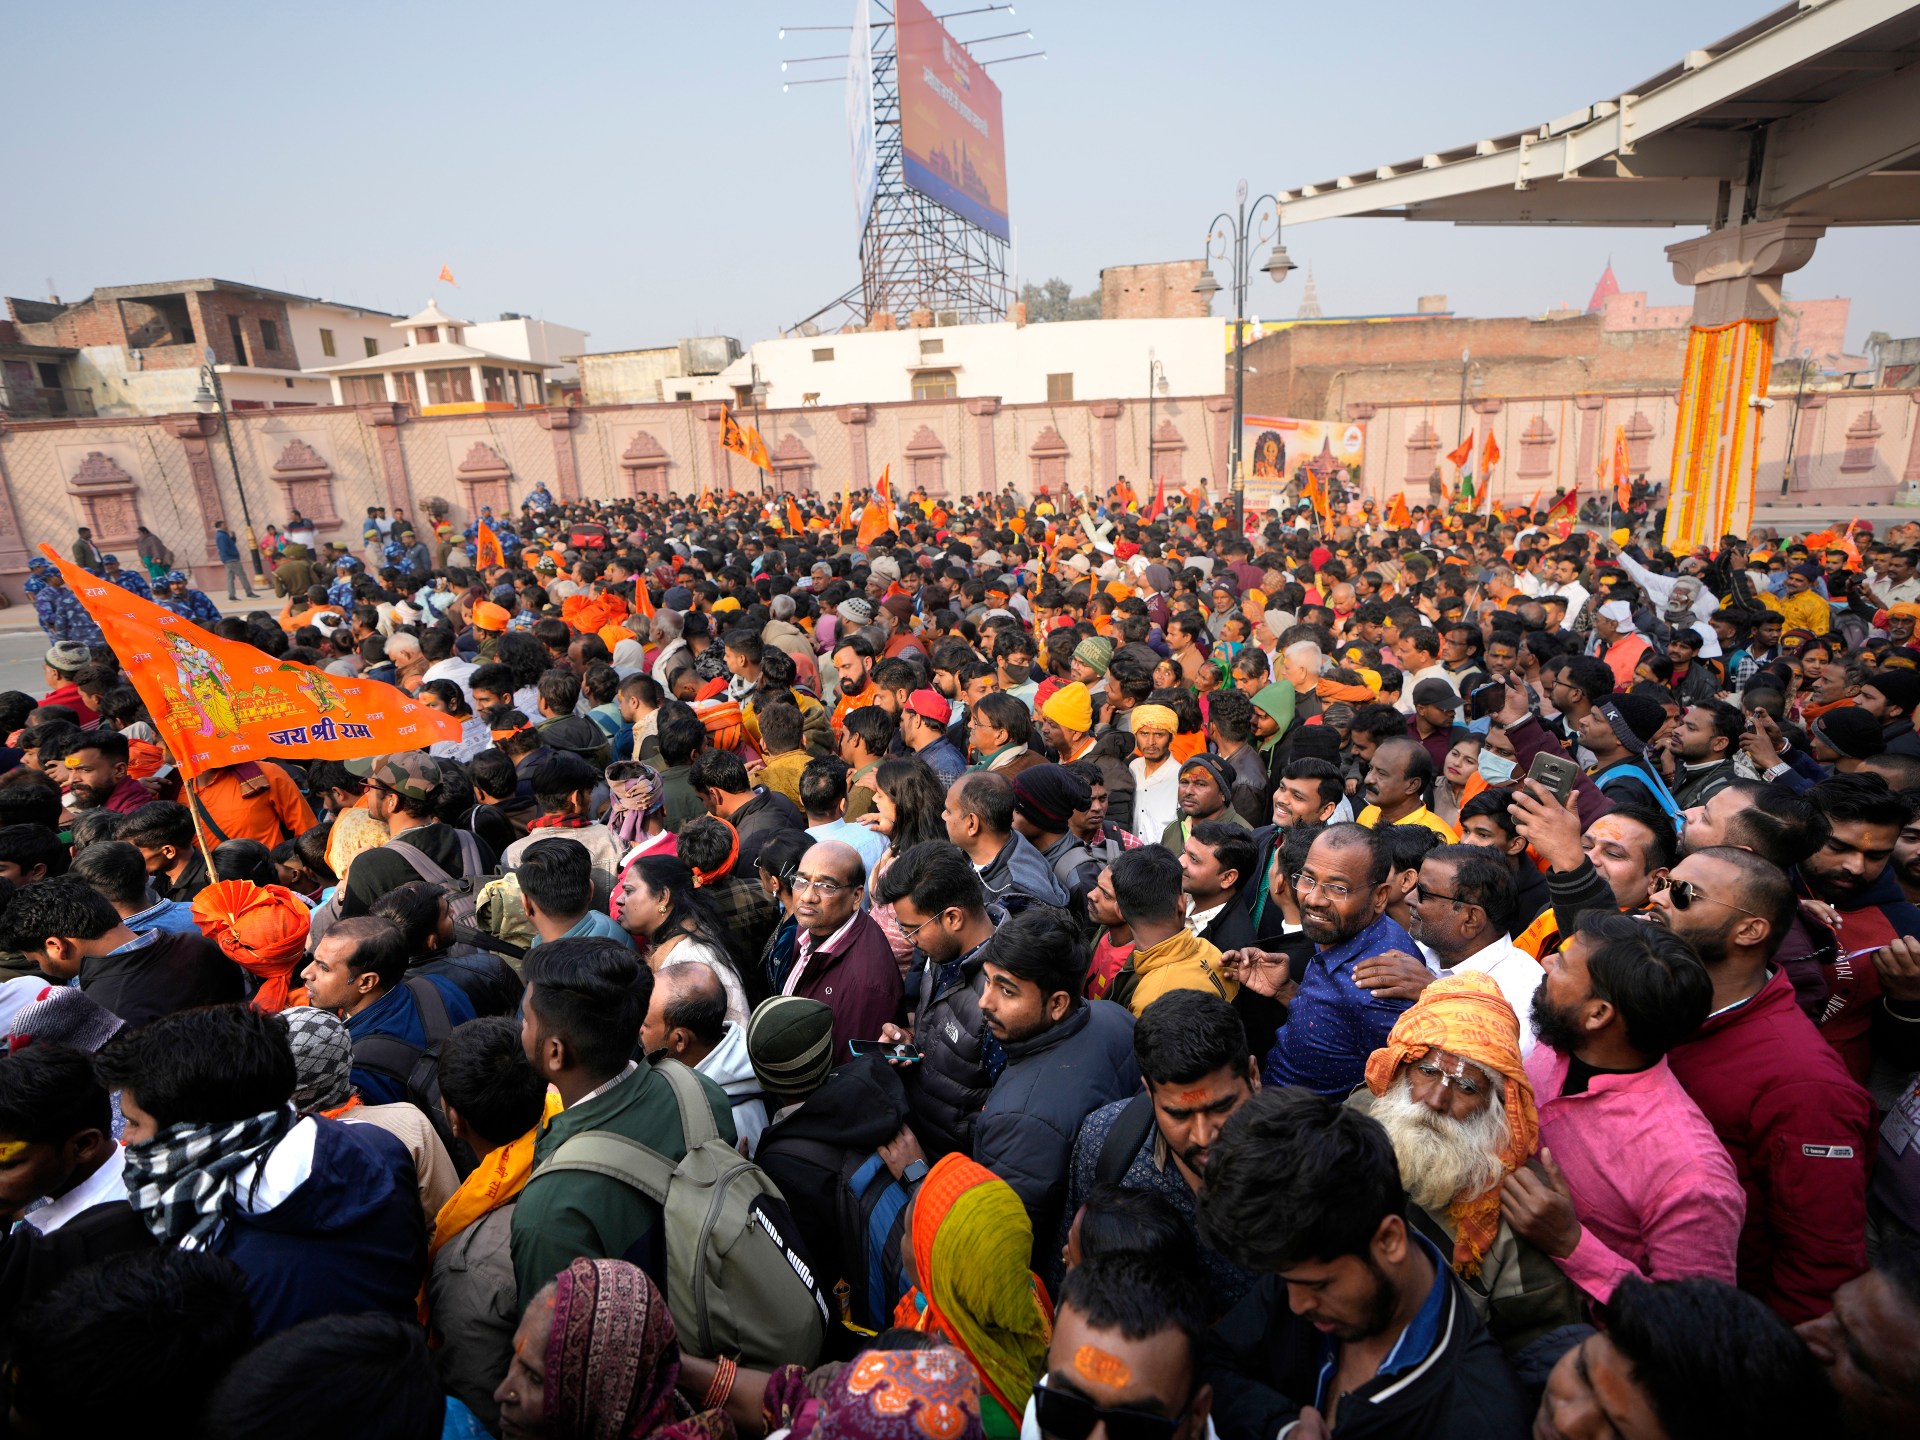 India’s Ayodhya wakes up to harsh realities after Modi’s Ram temple event | Religion News